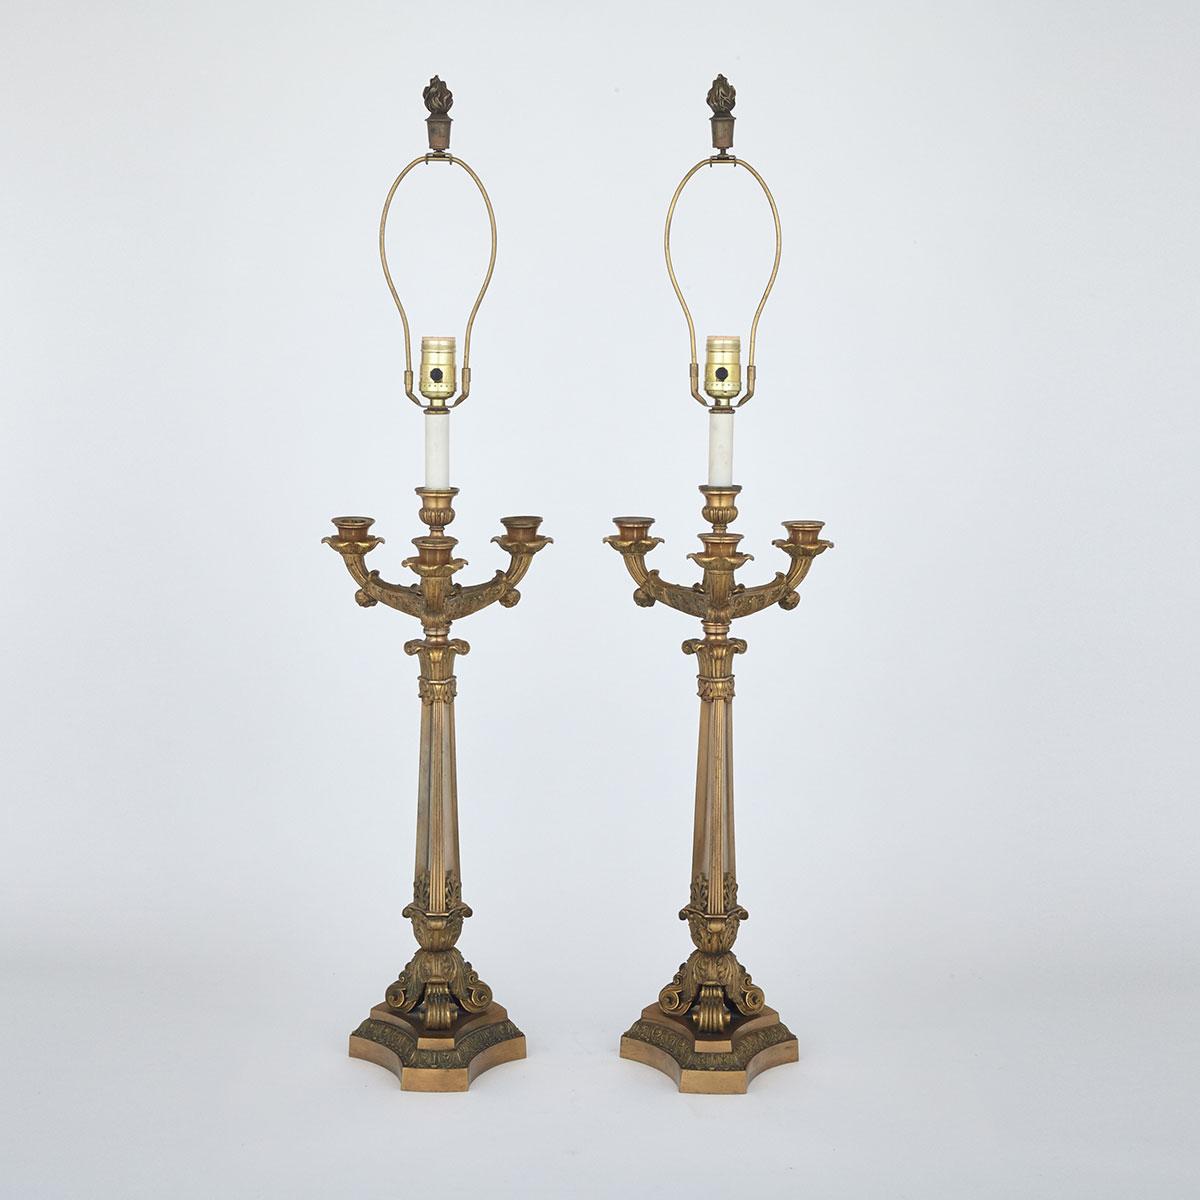 Pair of French Empire Gilt Bronze Candelabra Table Lamps, early 20th century